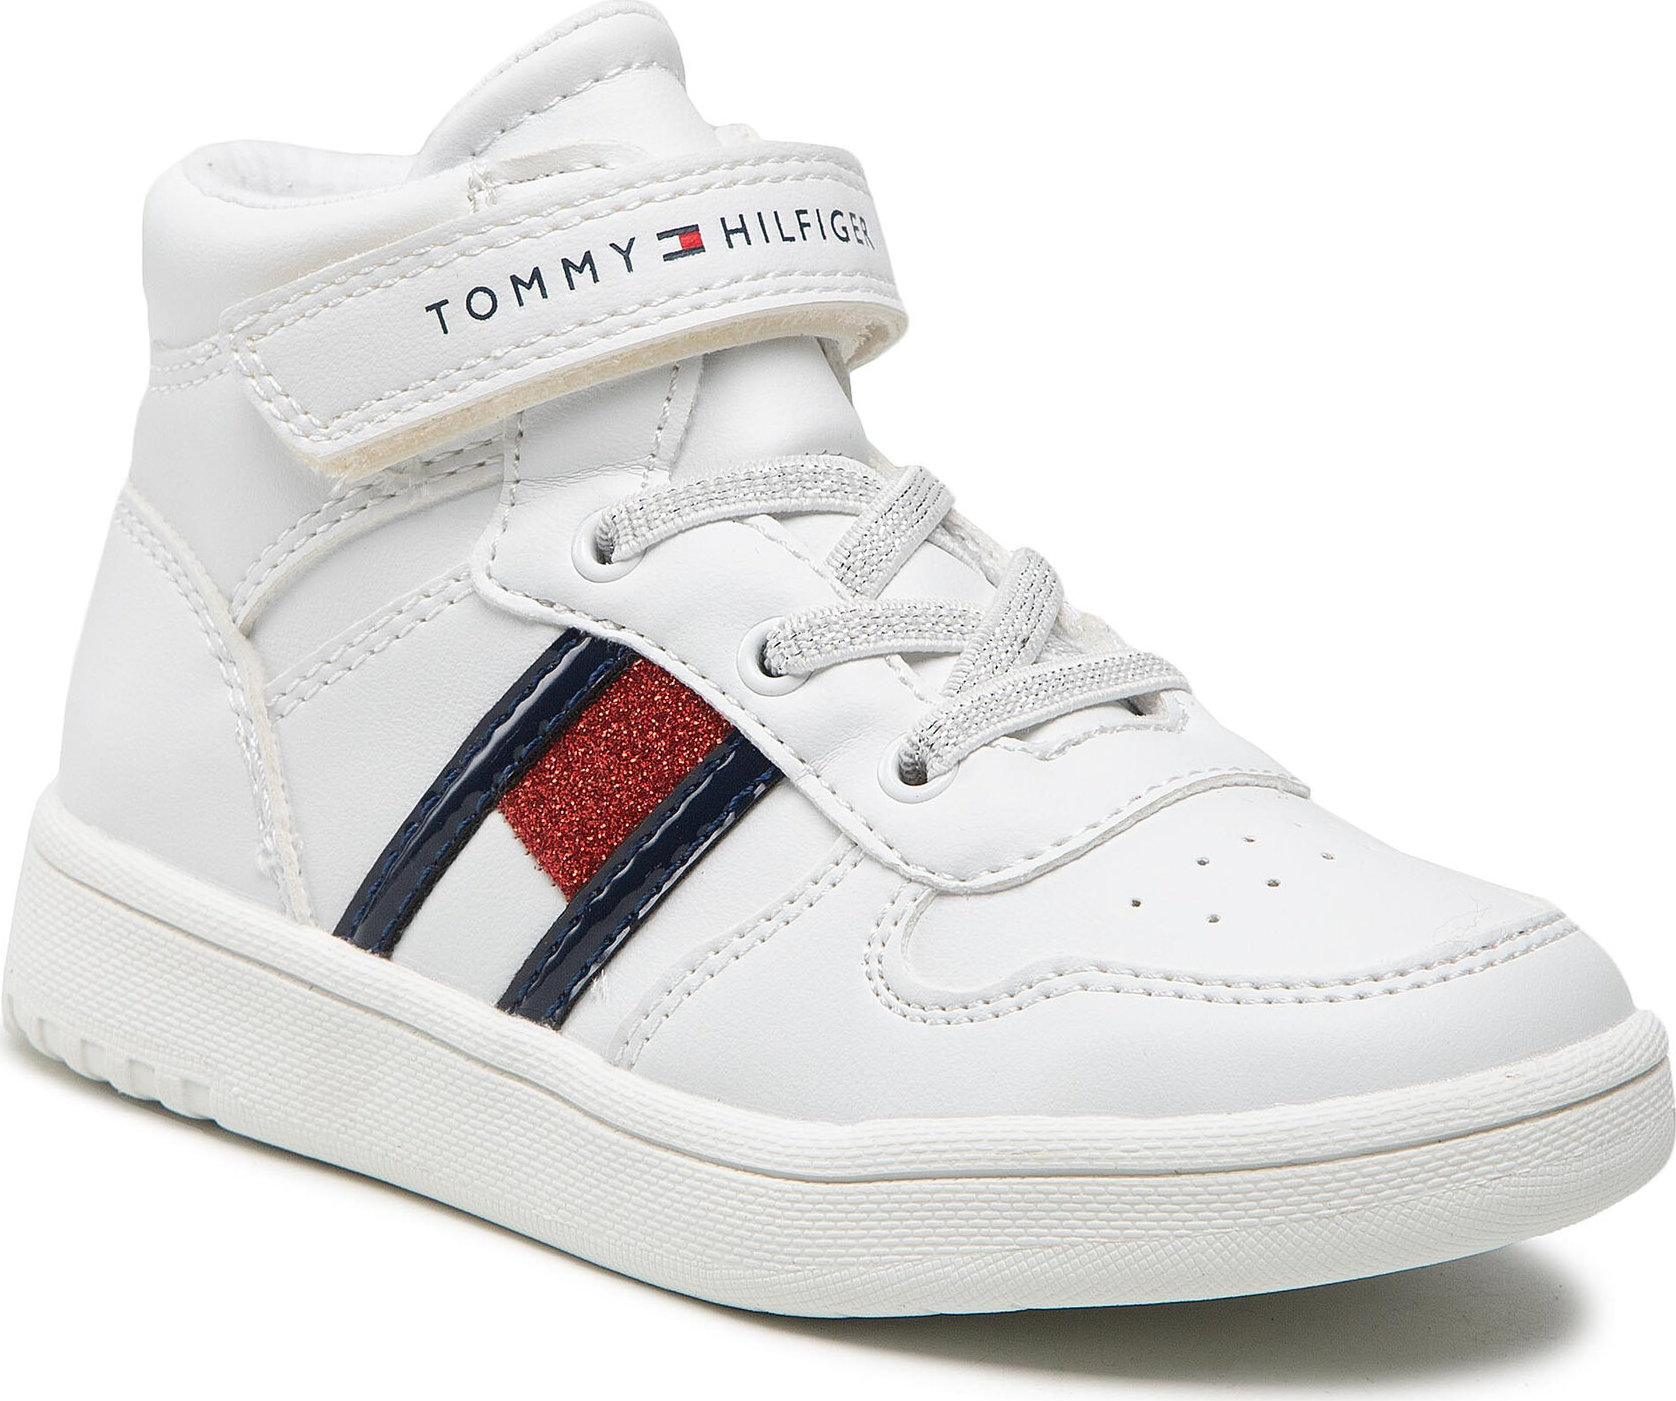 Sneakersy Tommy Hilfiger Higt Top Lace-Up/Velcro Sneaker T3A9-32330-1438 S White 100